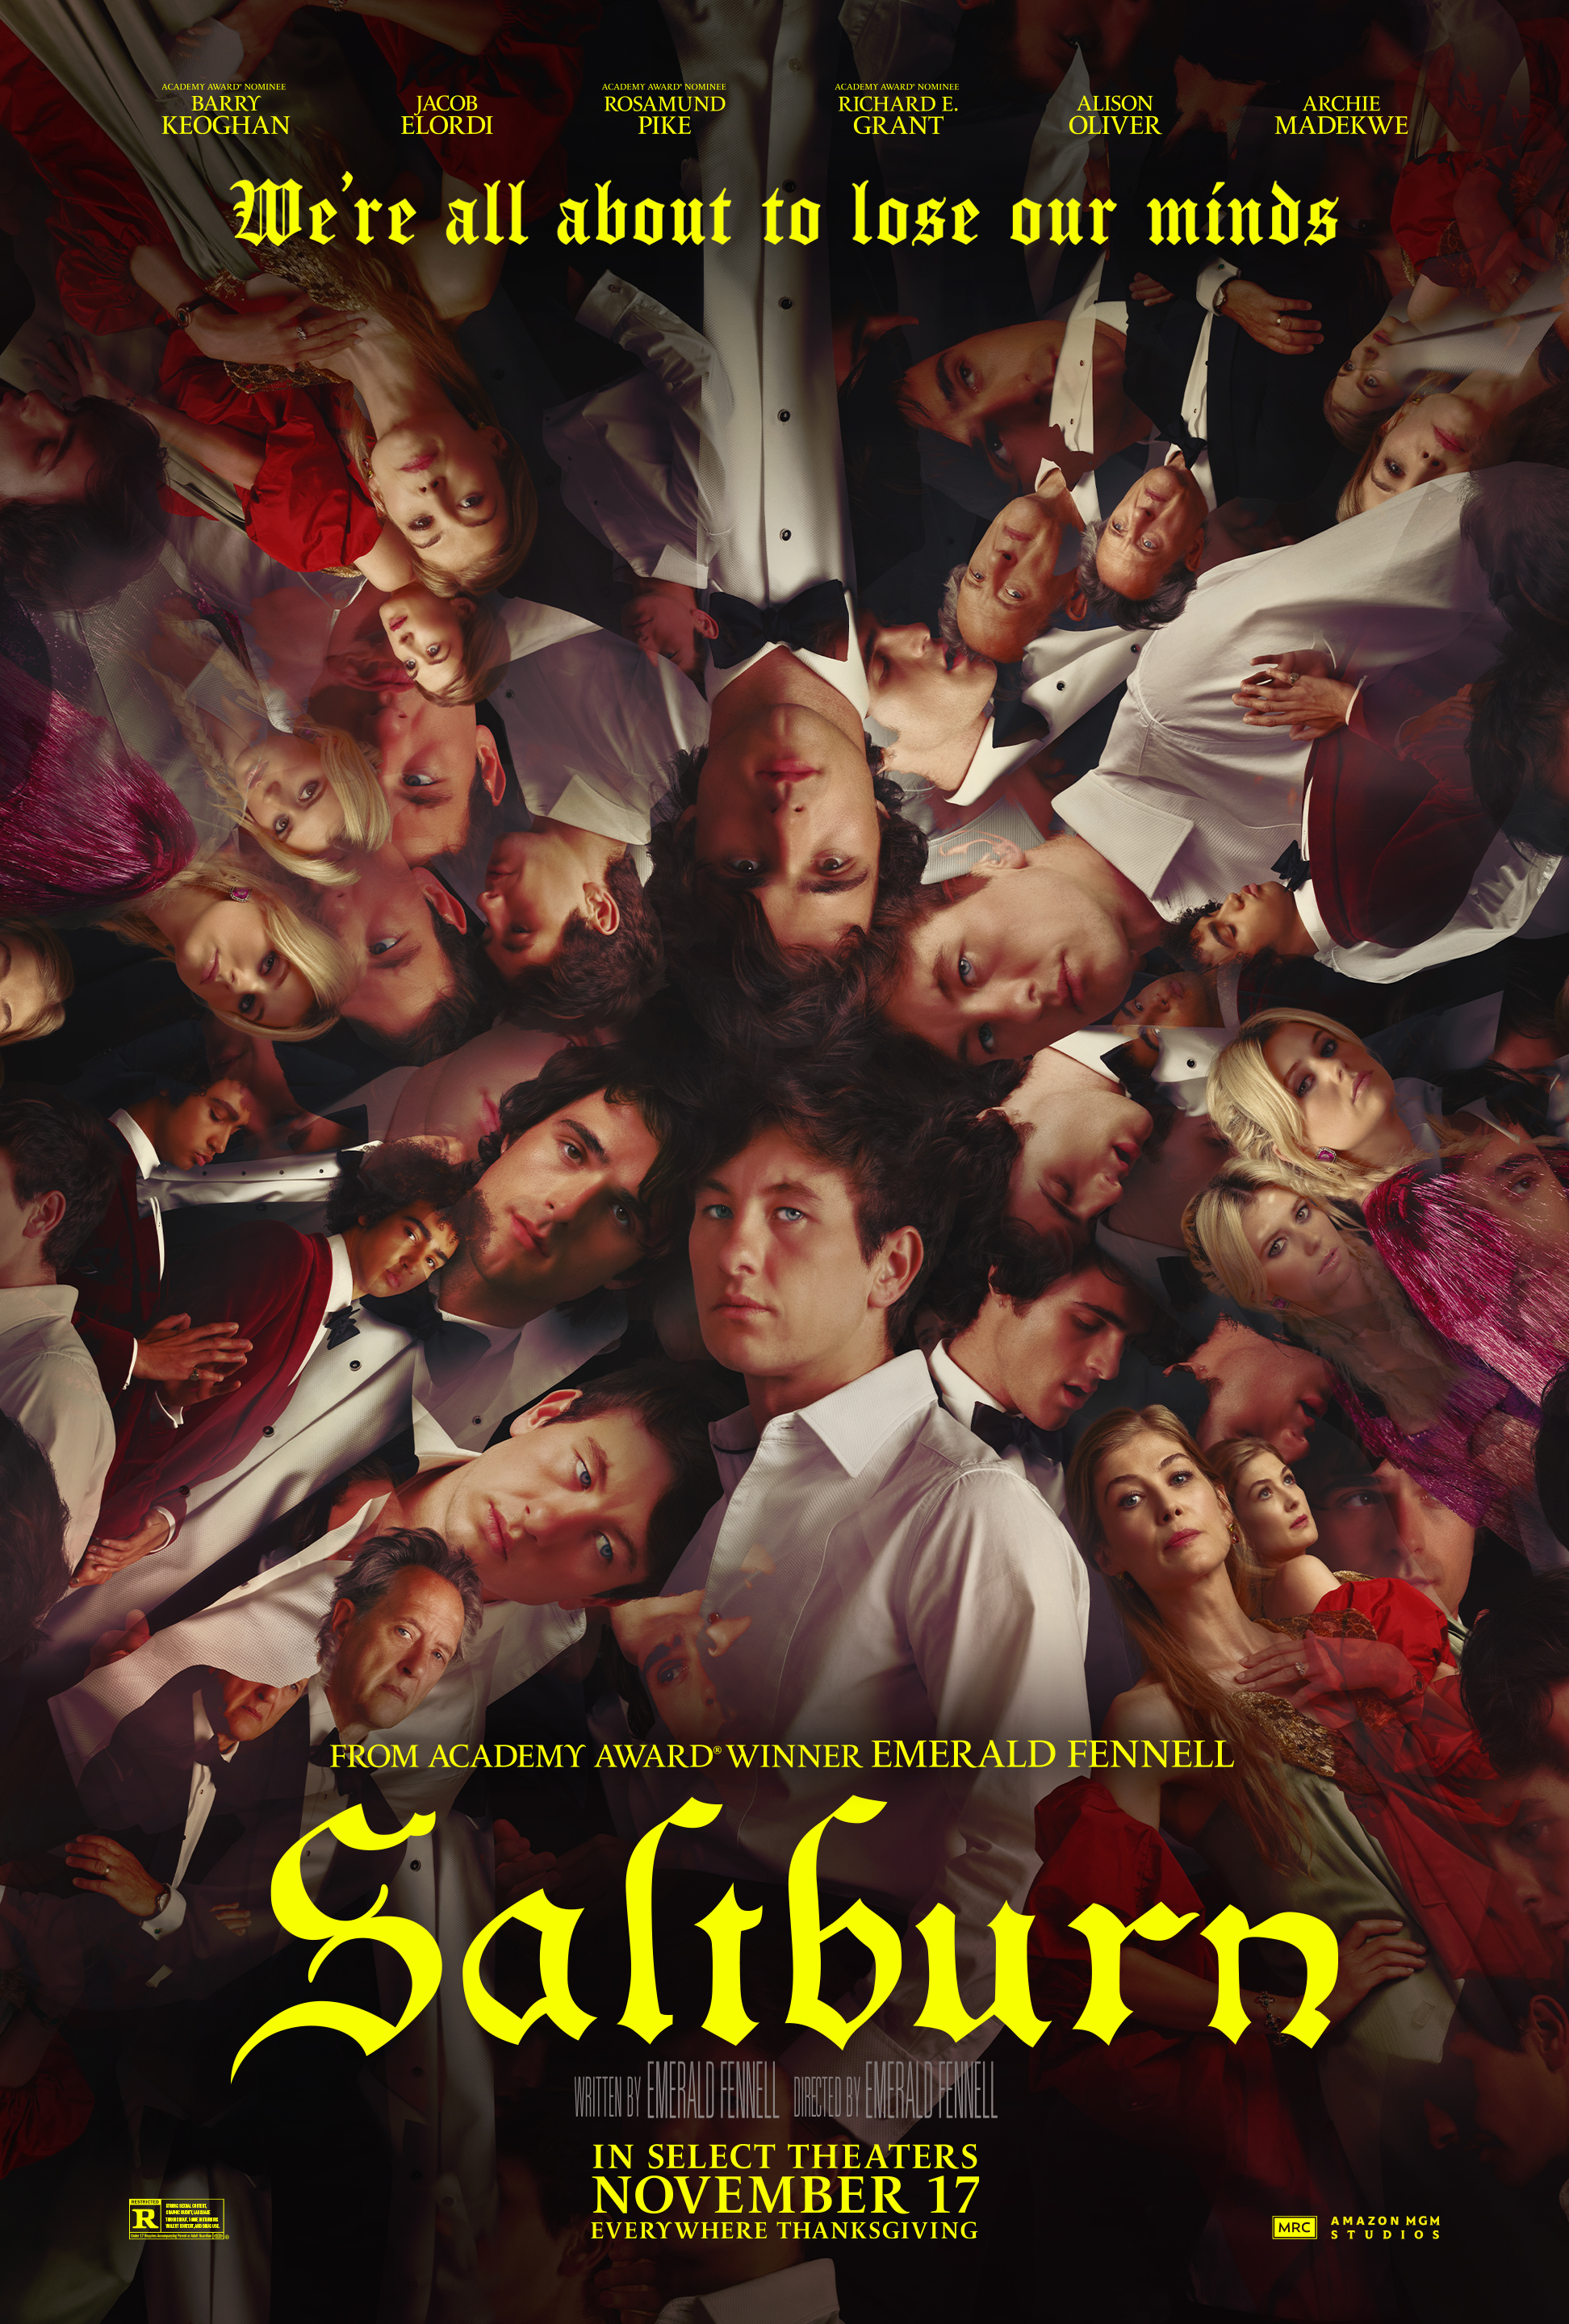 A kaleidoscope of portraits with the title, "Saltburn" in yellow at the bottom